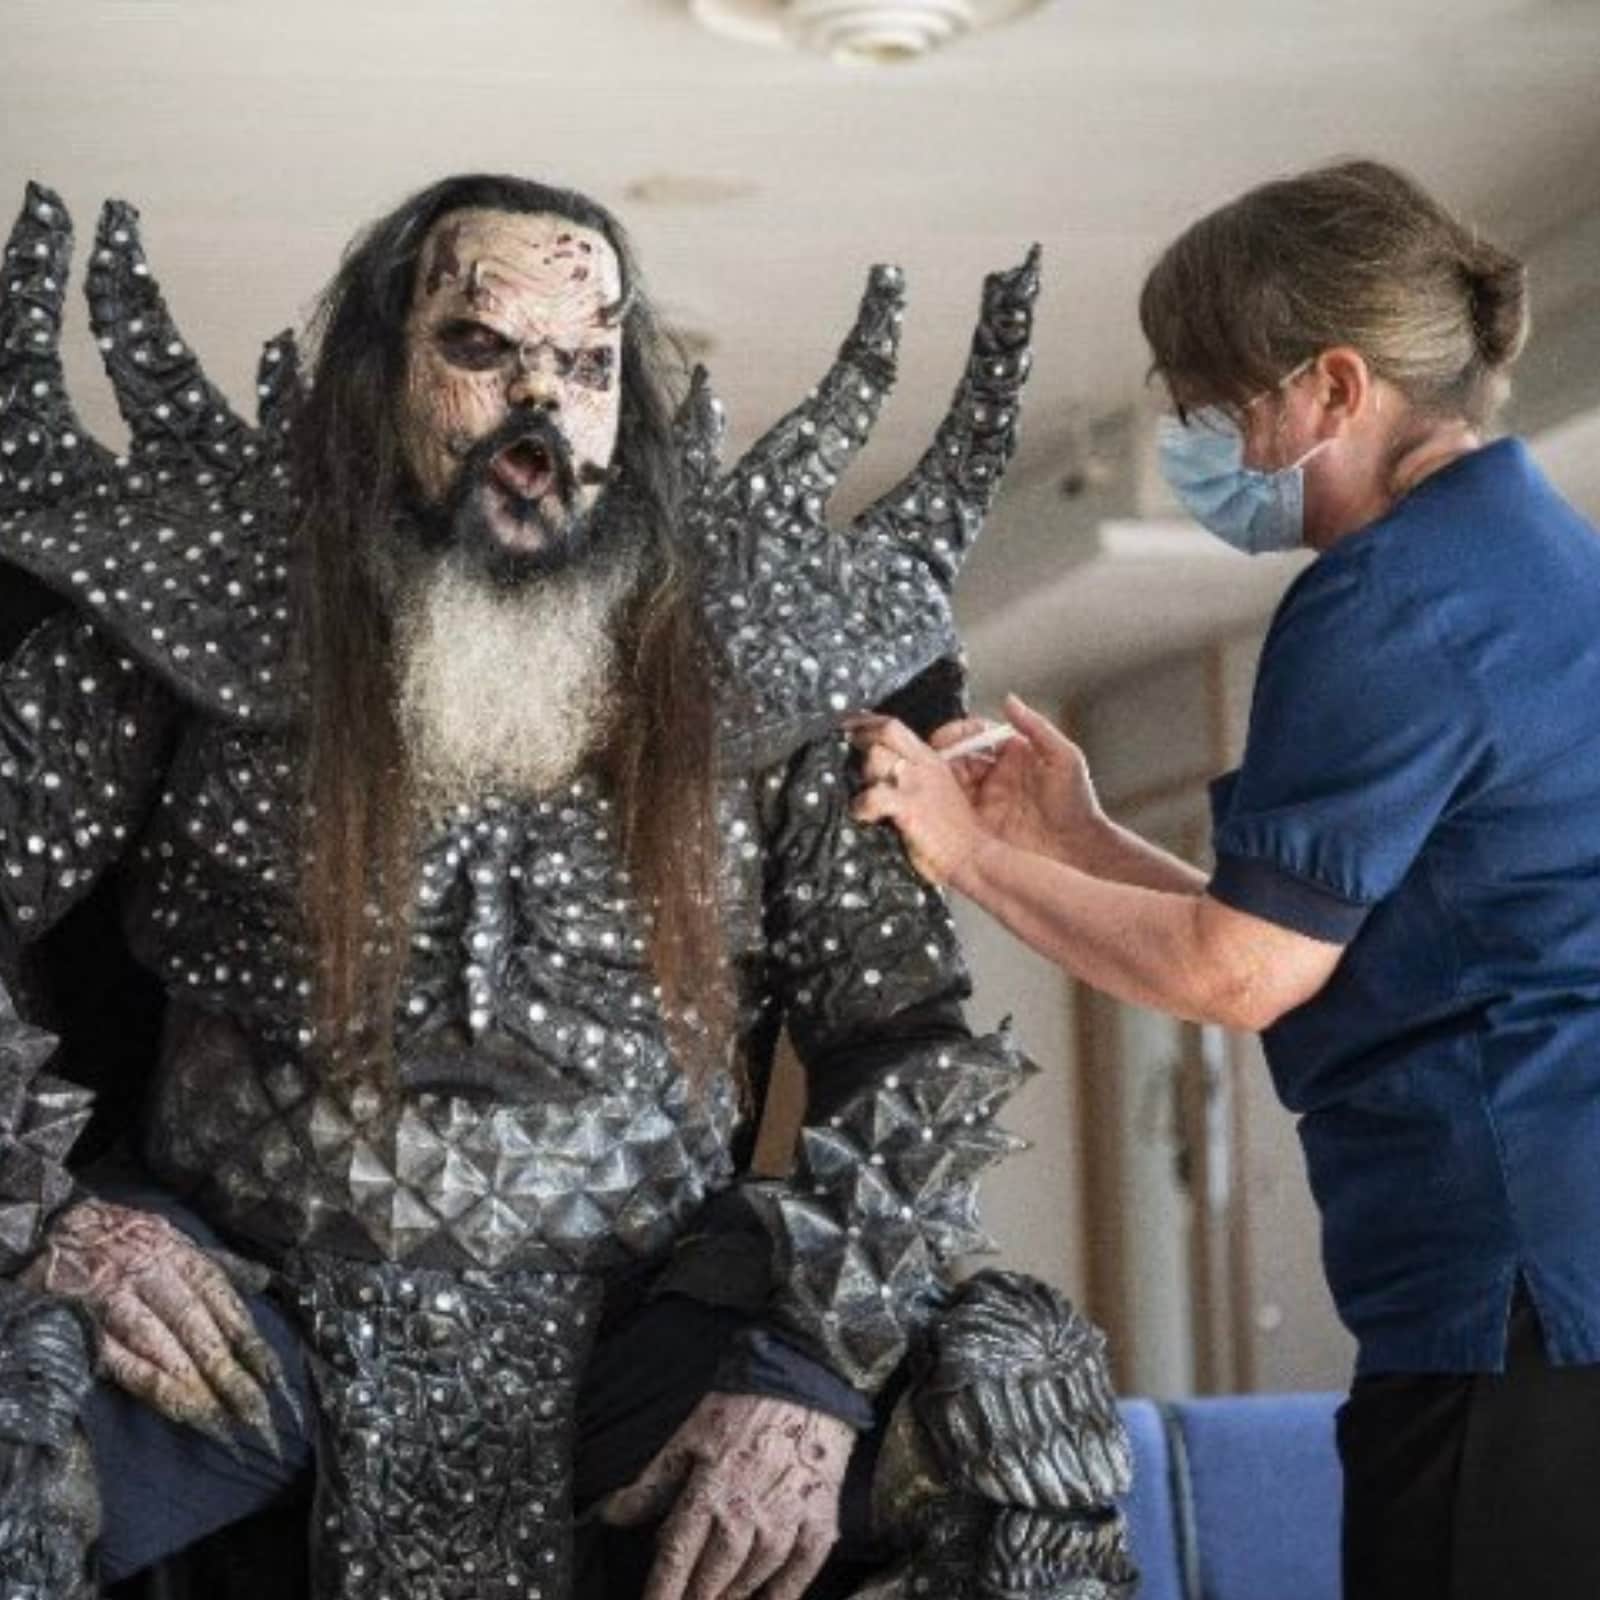 Finnish Musician Gets Covid-19 Vaccination in Full Costume